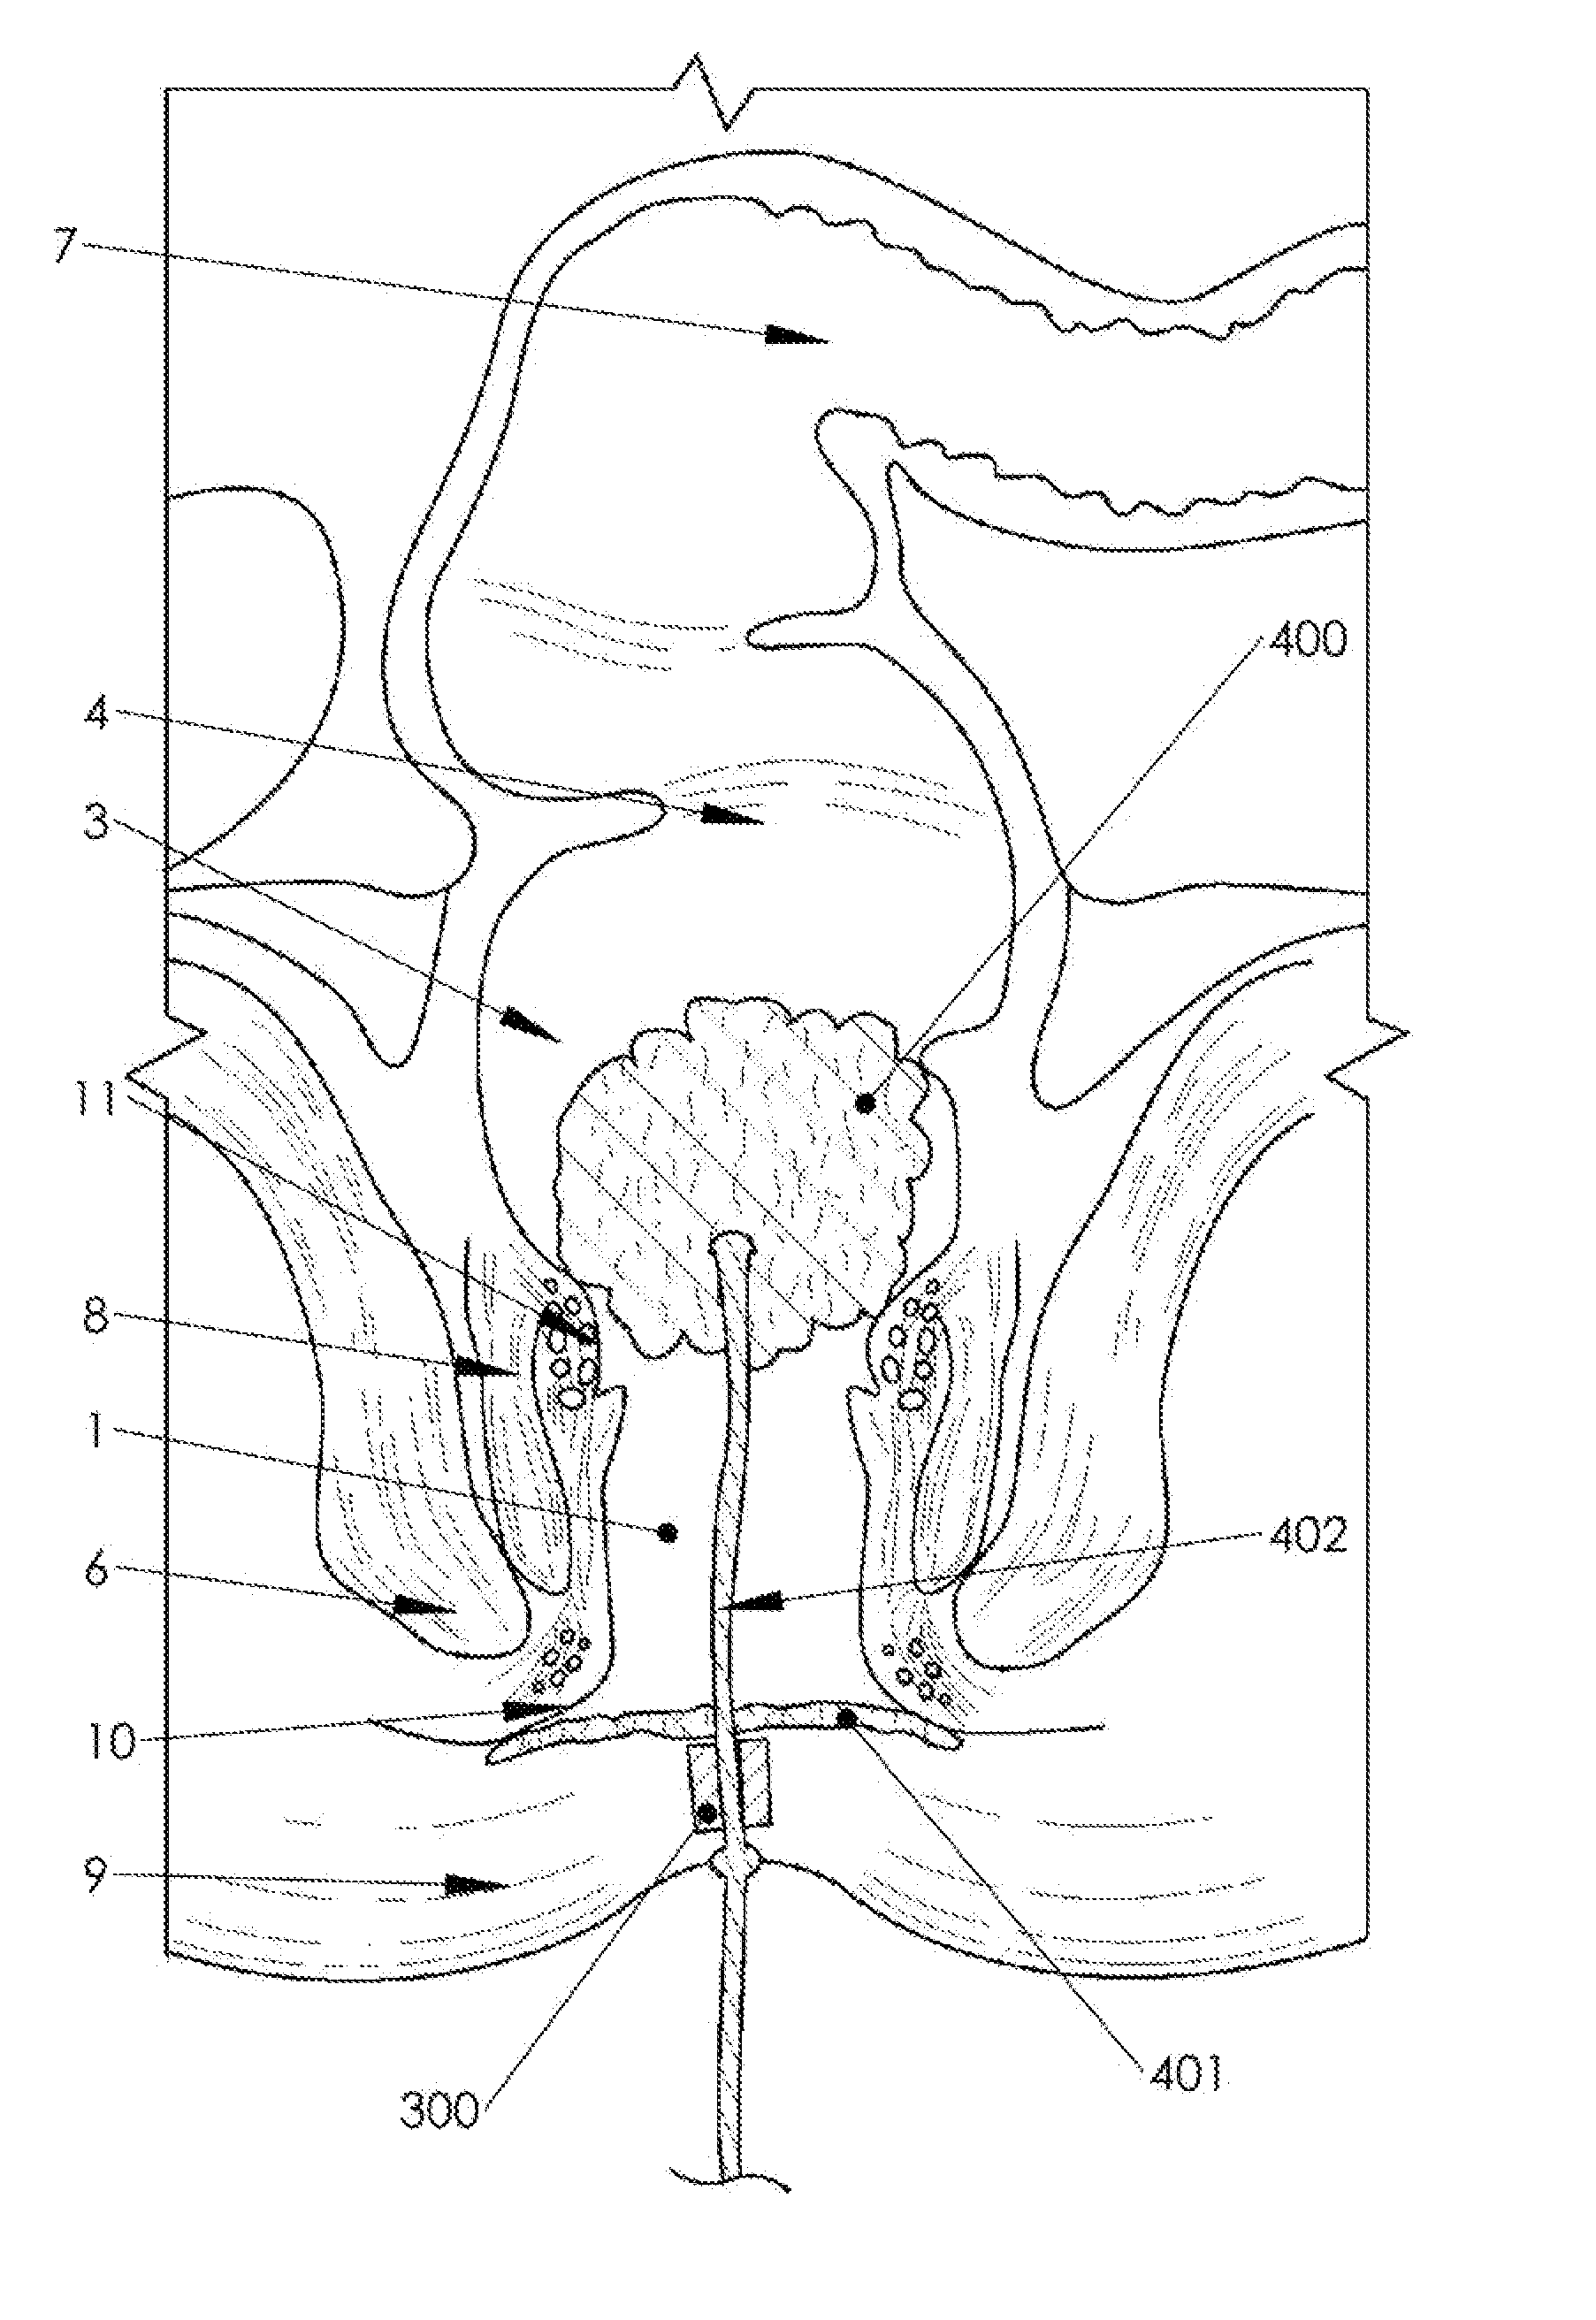 Device and method to avert anal fecal leakage